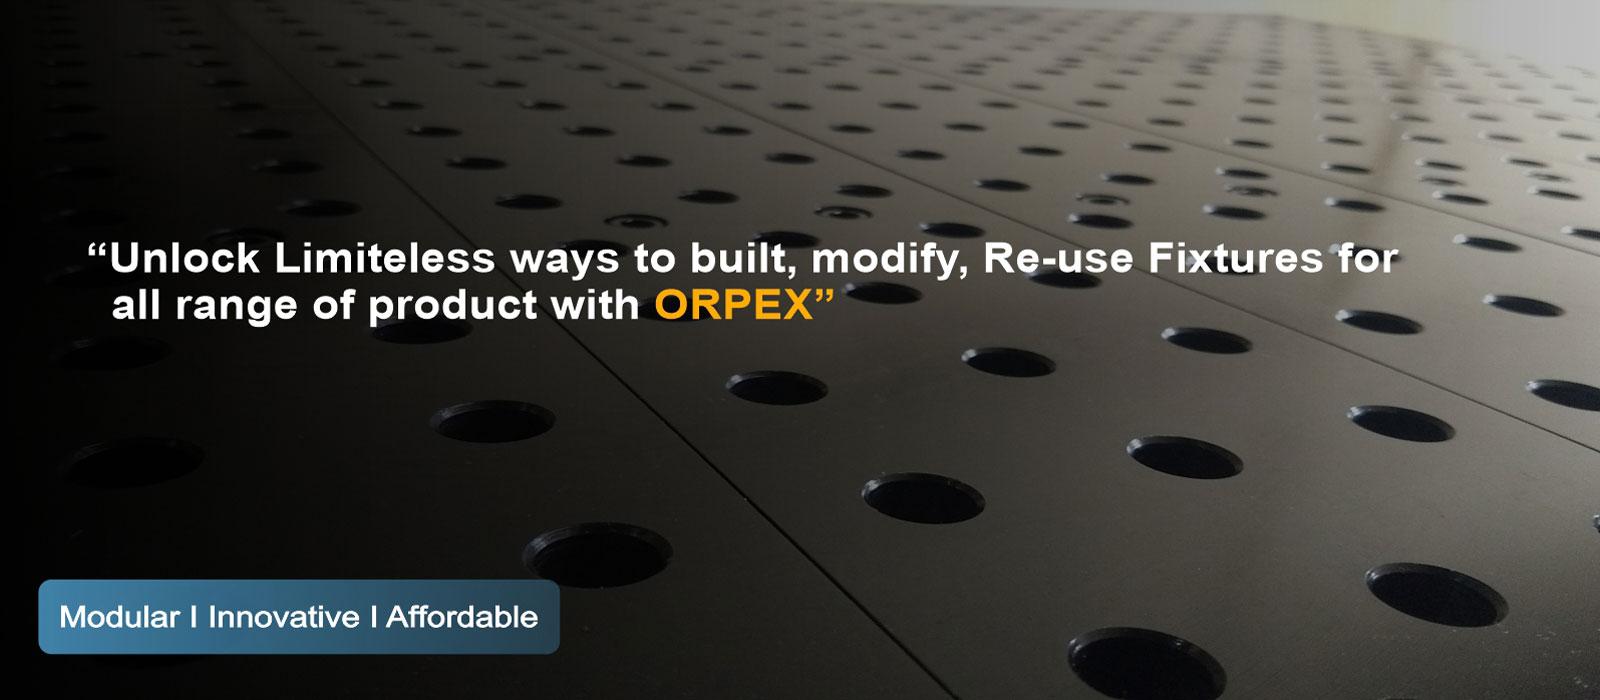 Hero Slider Image 4 | Unlock limitless ways to built, modify, re-use fixtures for all range of product with Orpex